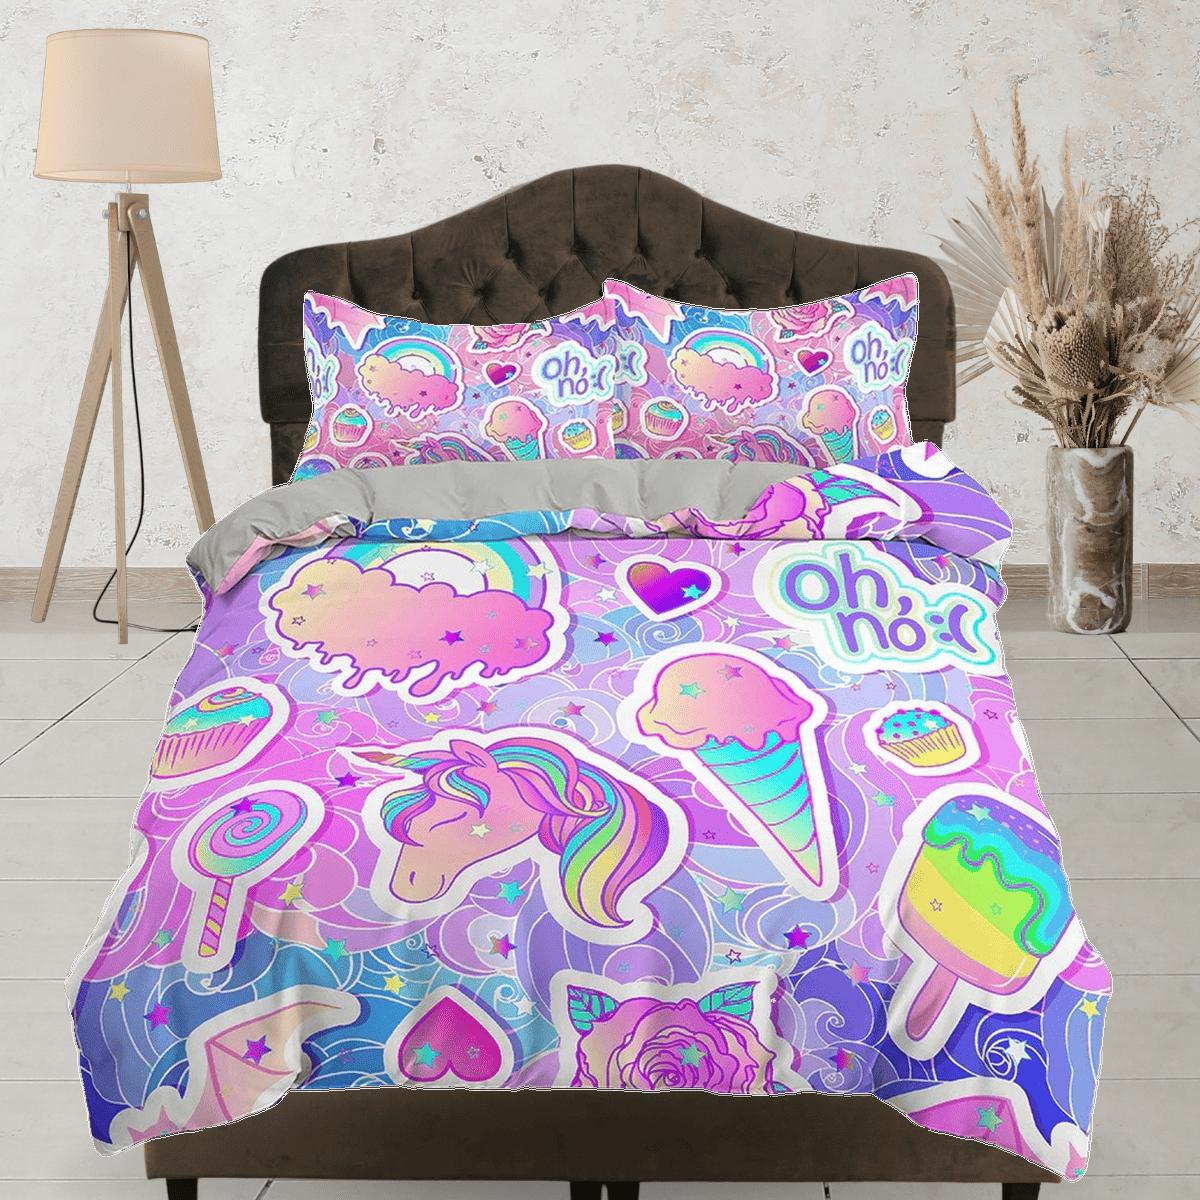 daintyduvet Unicorn Rainbow Colored Kids Duvet Cover Set, Colorful Toddler Bedding, Kids Bedroom, Cute Ice Cream Bedding, King Queen Full Twin Single